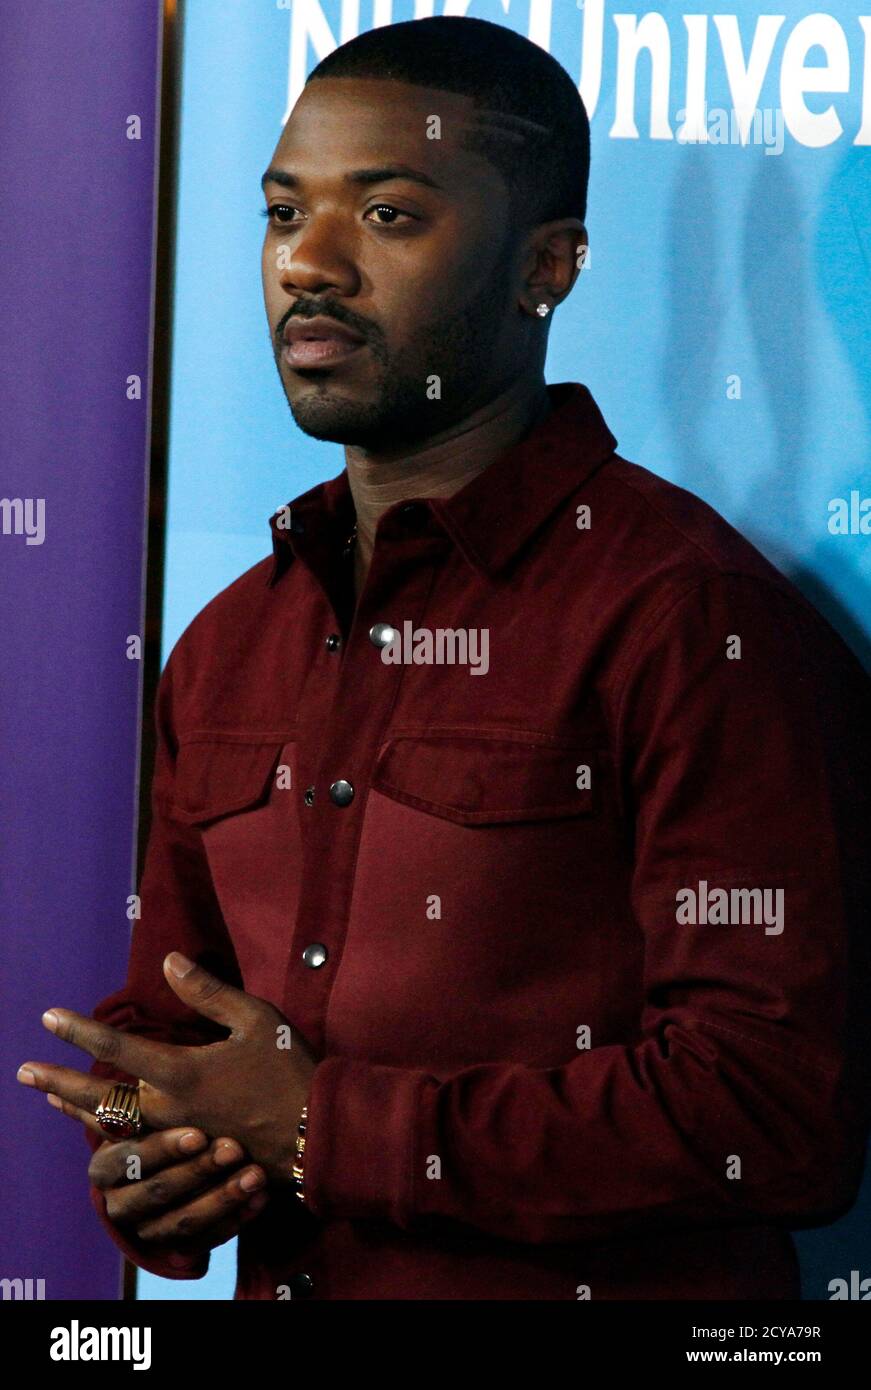 Singer Ray J, host of 'Bad Girls All Star Battle', arrives at the 2013 NBCUniversal Summer Press Day at The Langham Huntington Hotel and Spa in Pasadena, California, April 22, 2013. REUTERS/Jonathan Alcorn (UNITED STATES - Tags: ENTERTAINMENT) Stock Photo